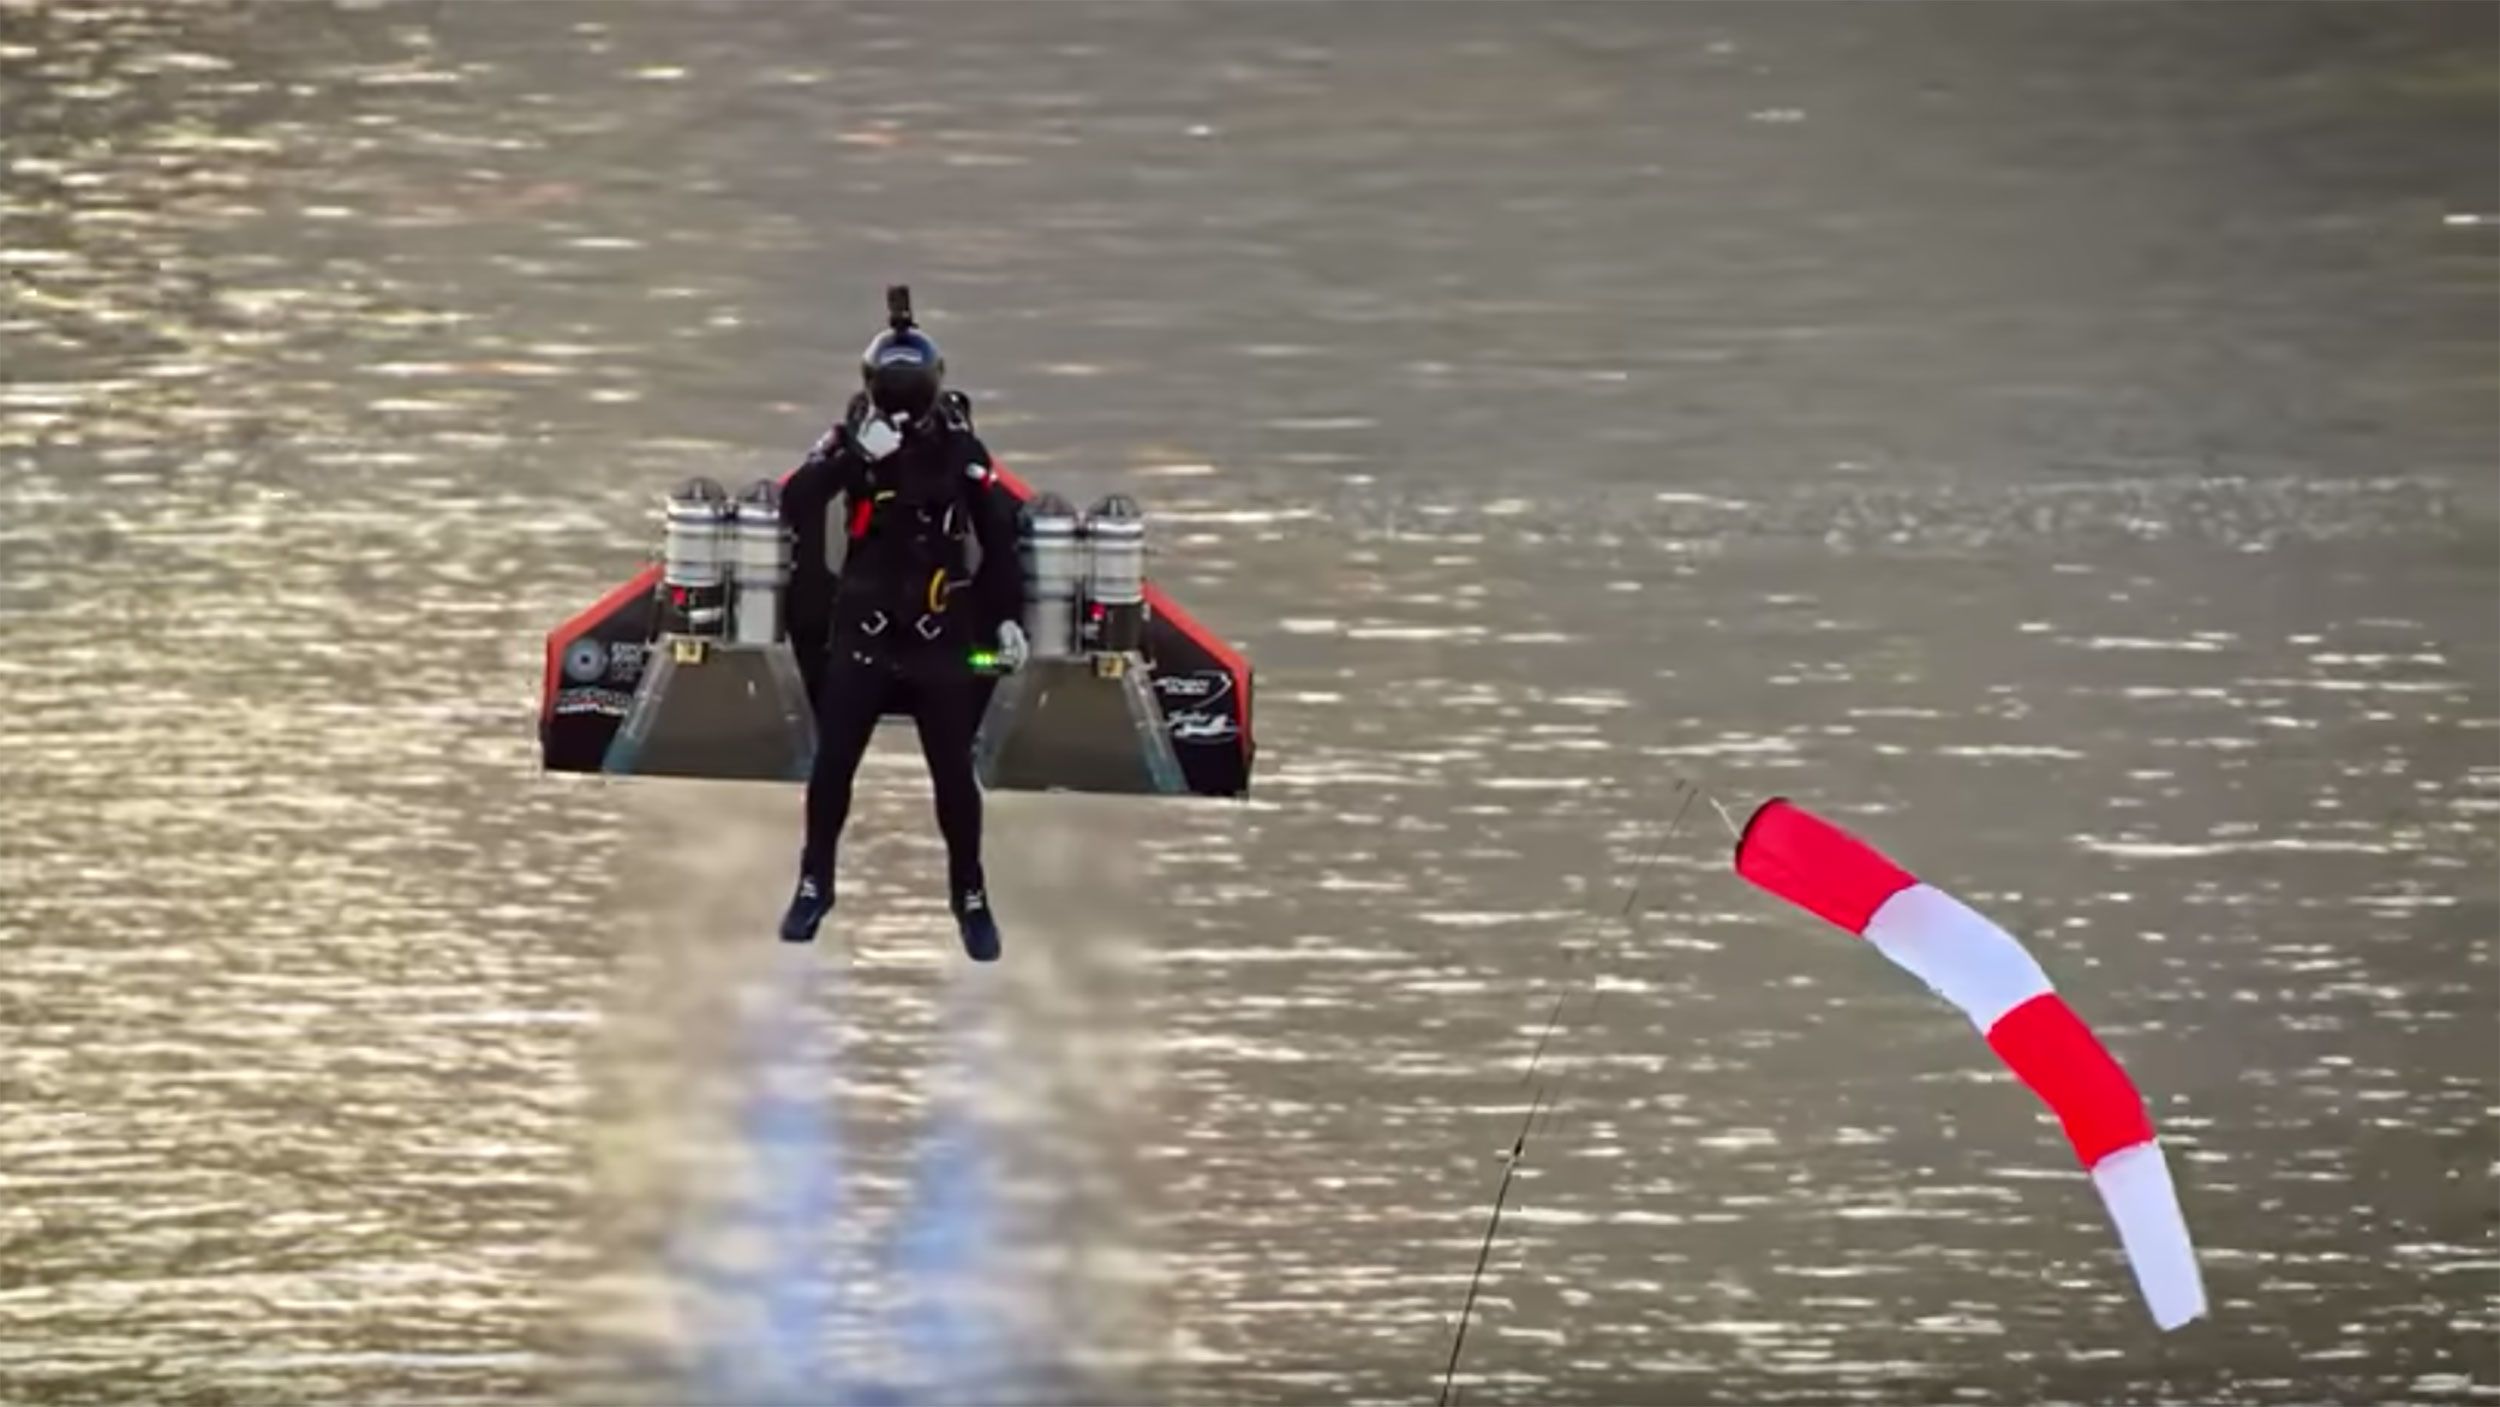 Jetpack-Flying Man Makes History with High-Altitude Flight from Dubai